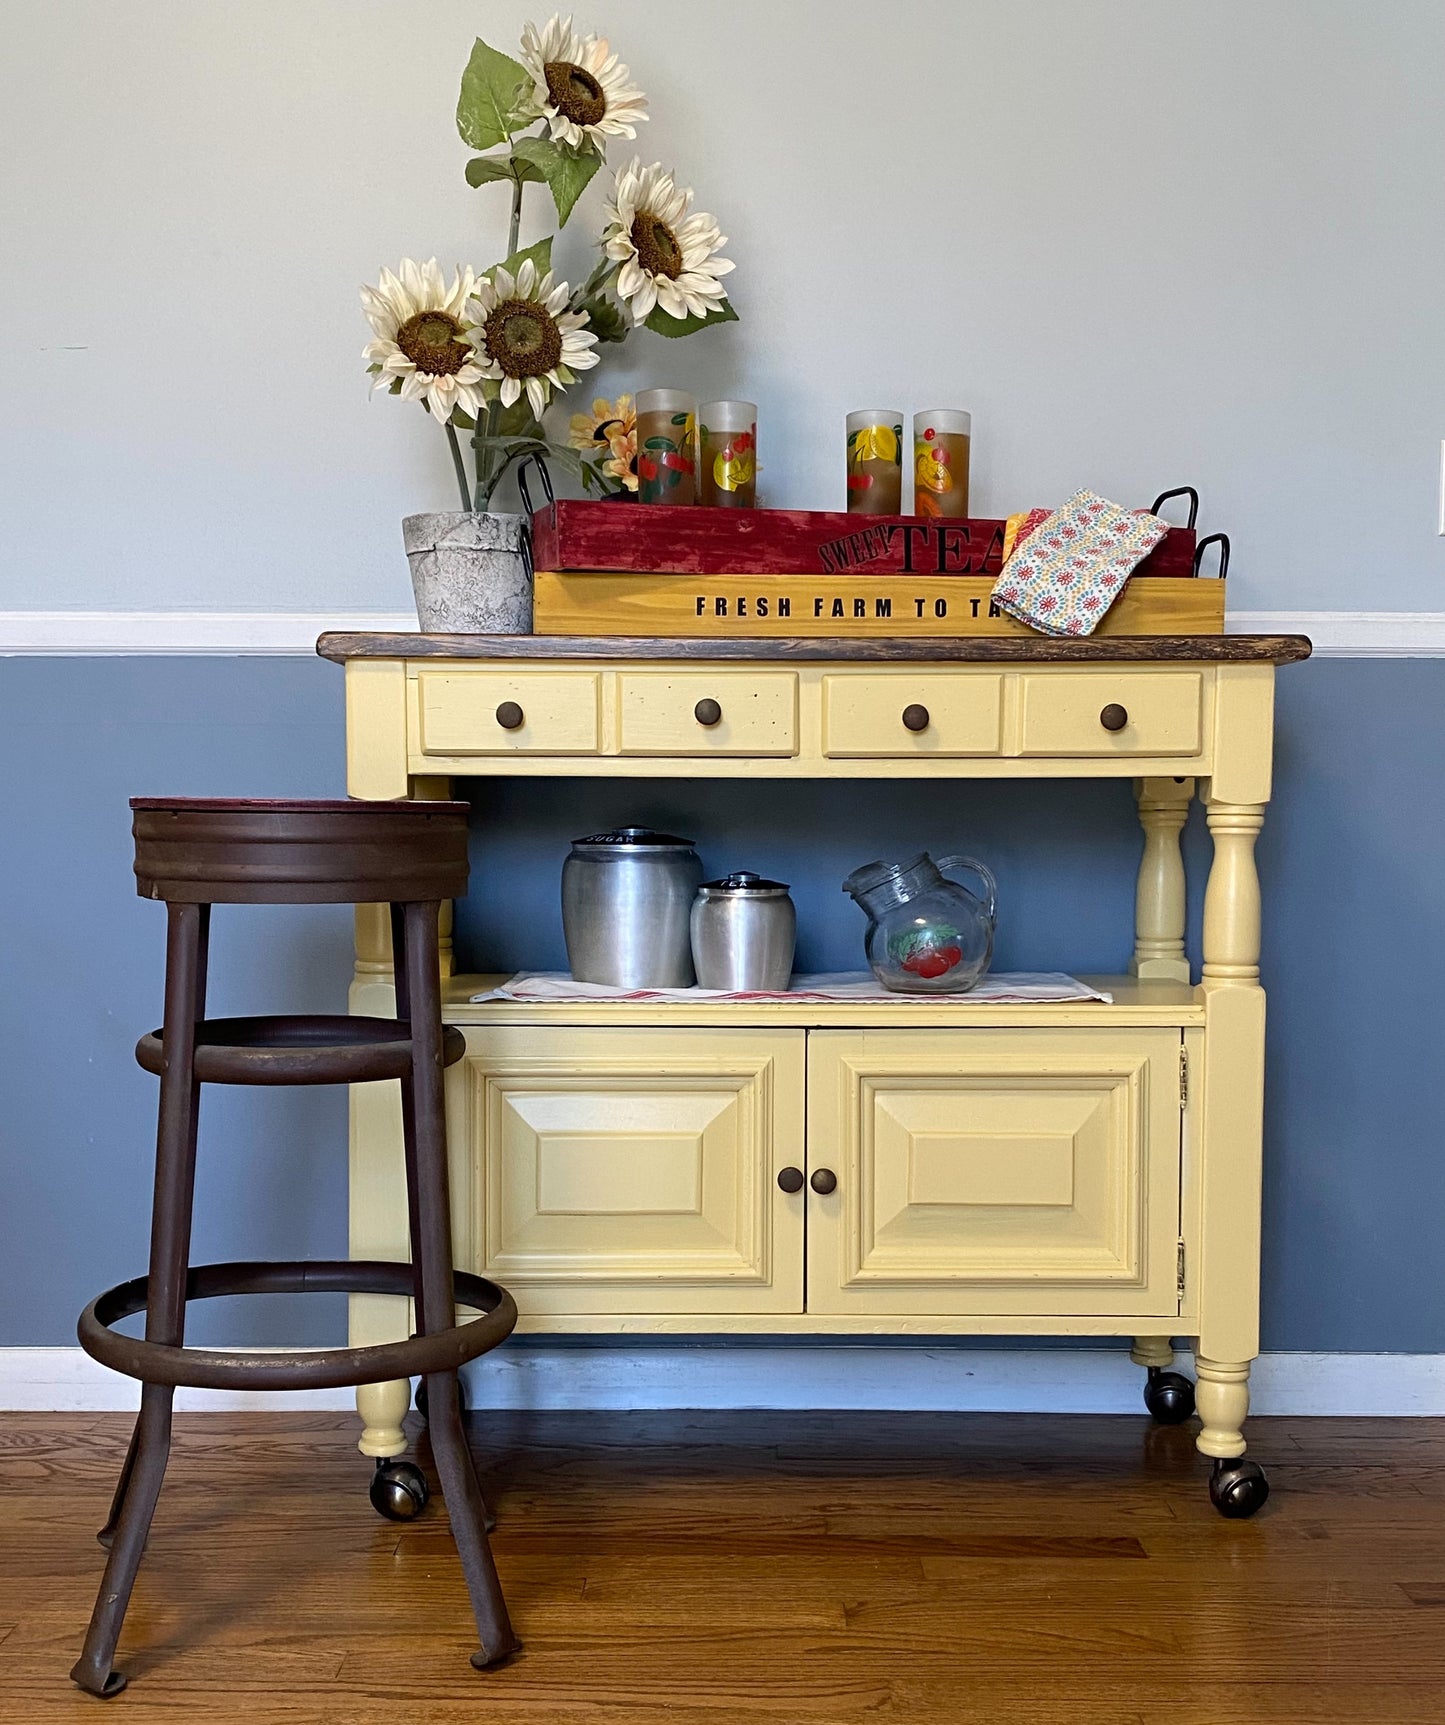 Sunflower Furniture and Cabinet Paint